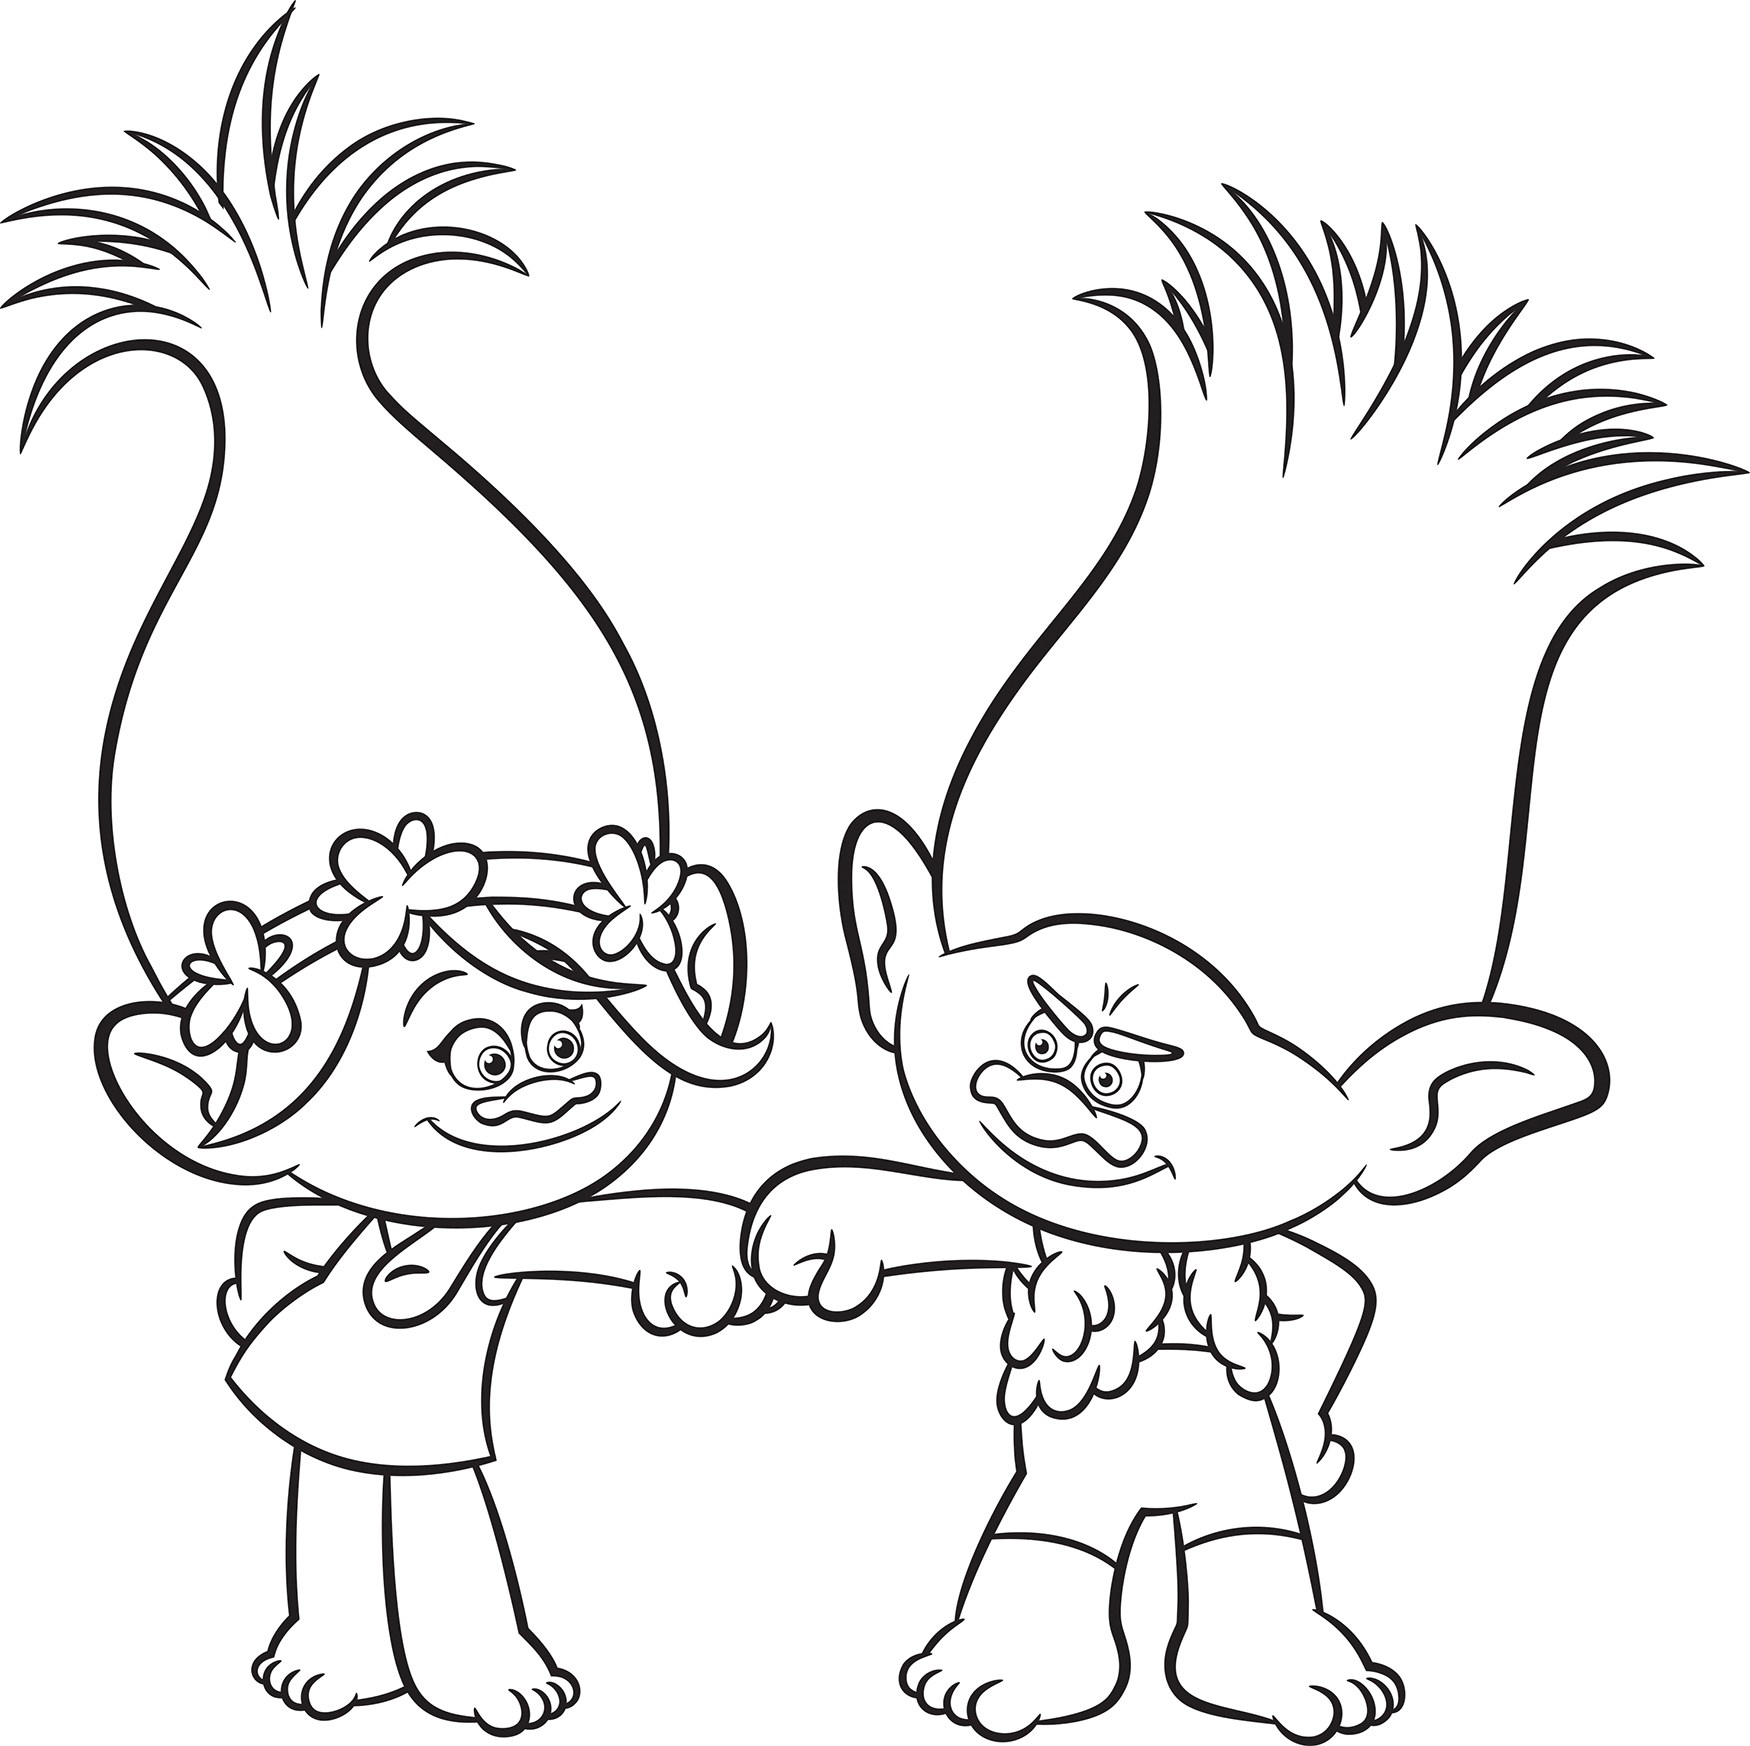 Poppy And Branch Smiling Coloring Page